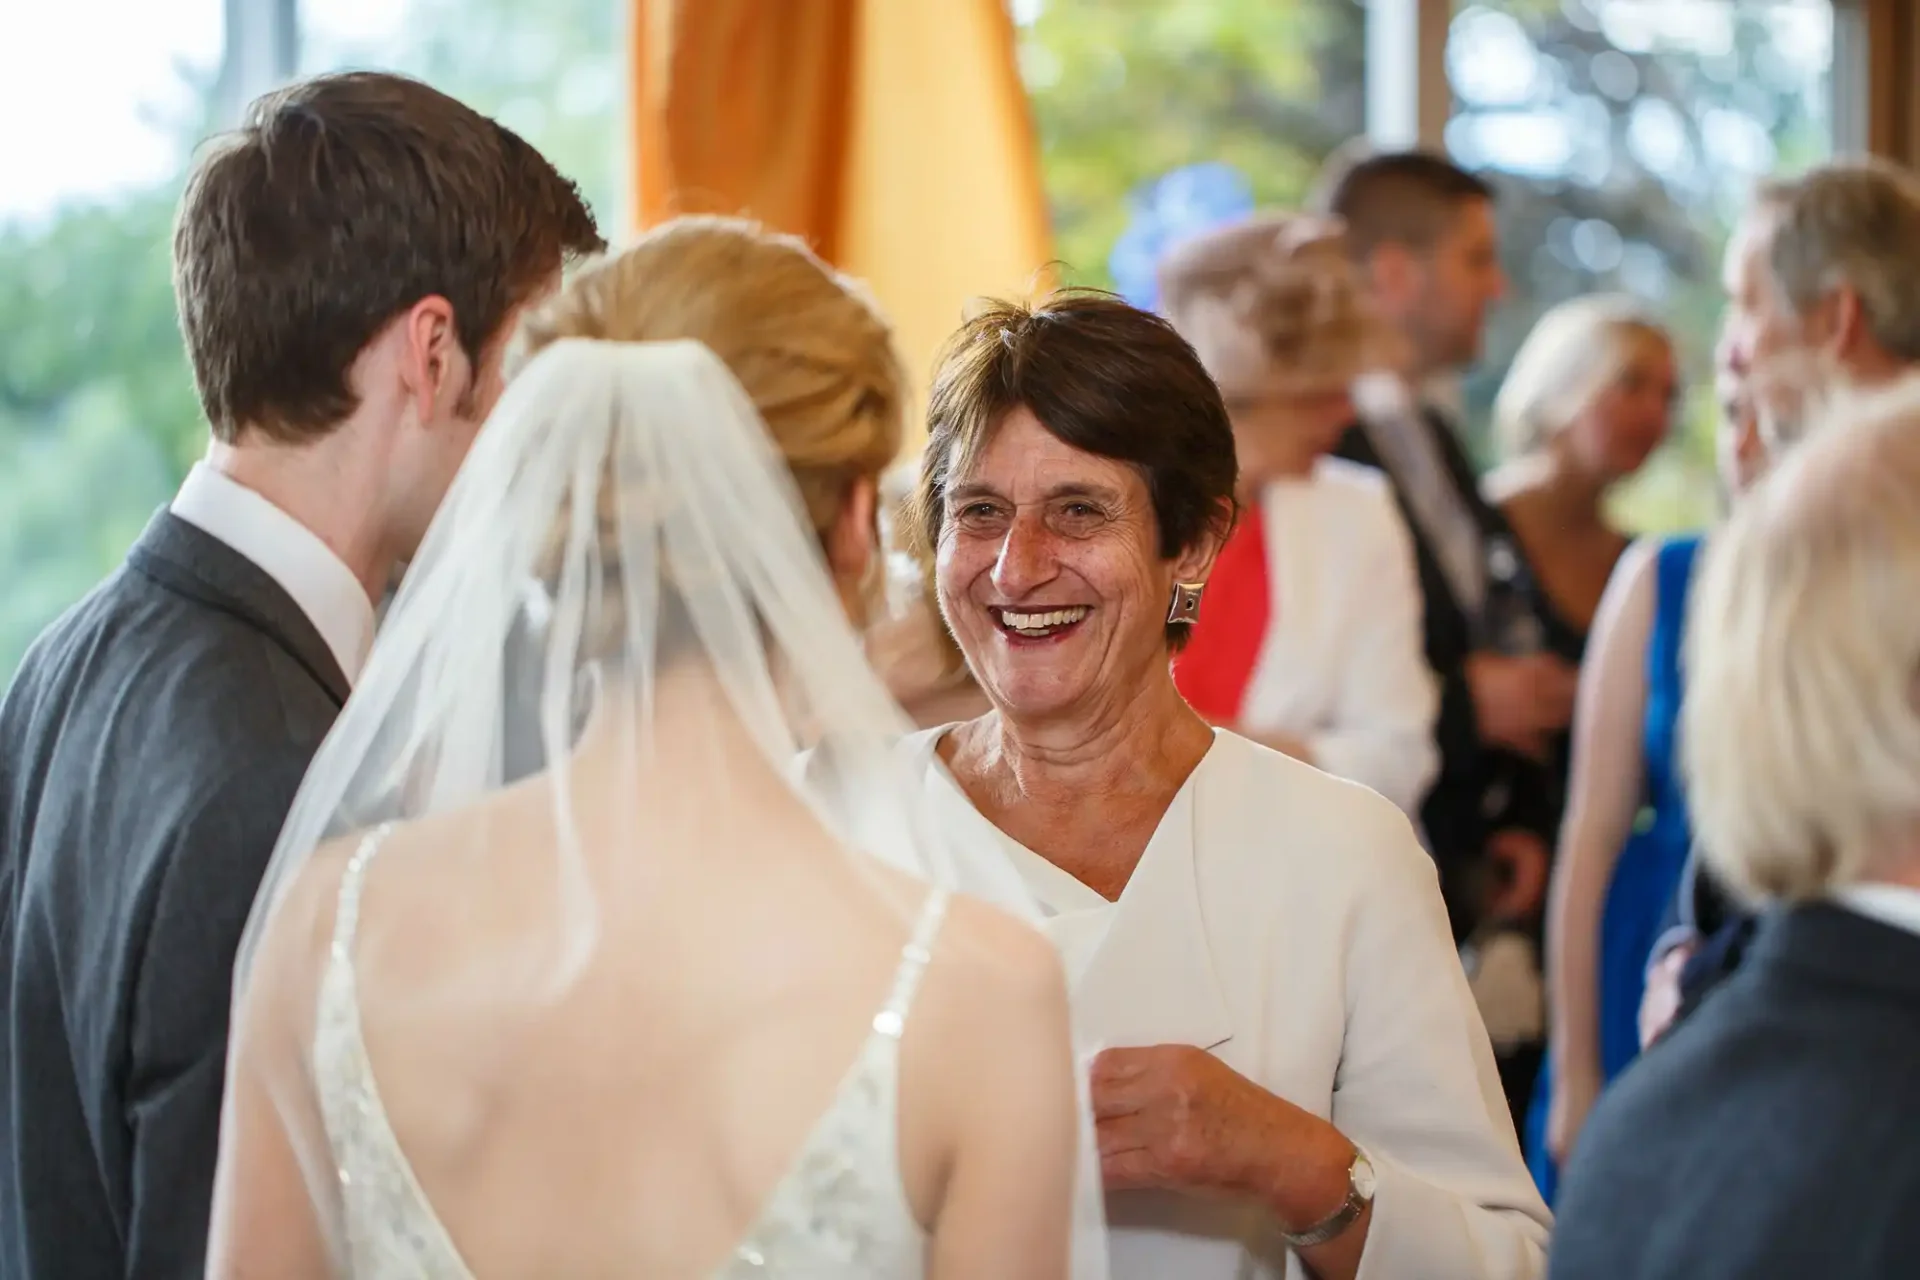 A joyful elderly woman chats with a bride and a groom at a wedding reception filled with guests in the background.